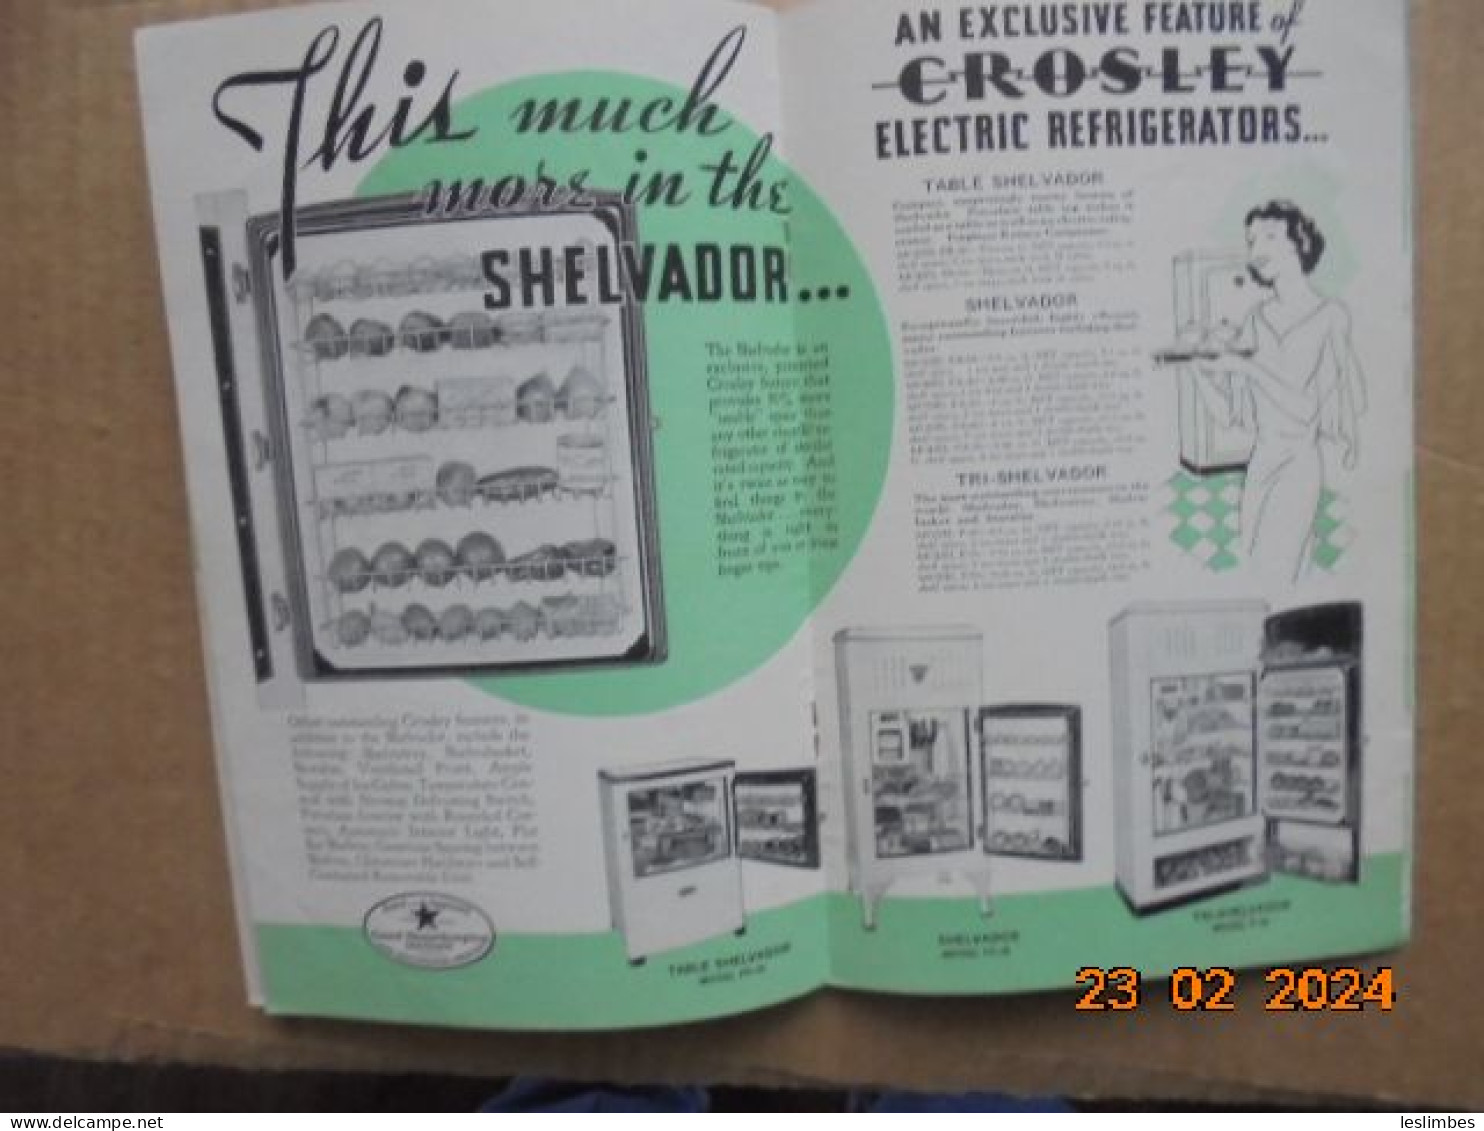 Delicious Frozen Dishes Made In The Crosley Shelvador And Tri-Shelvador Electric Refrigerator - Américaine